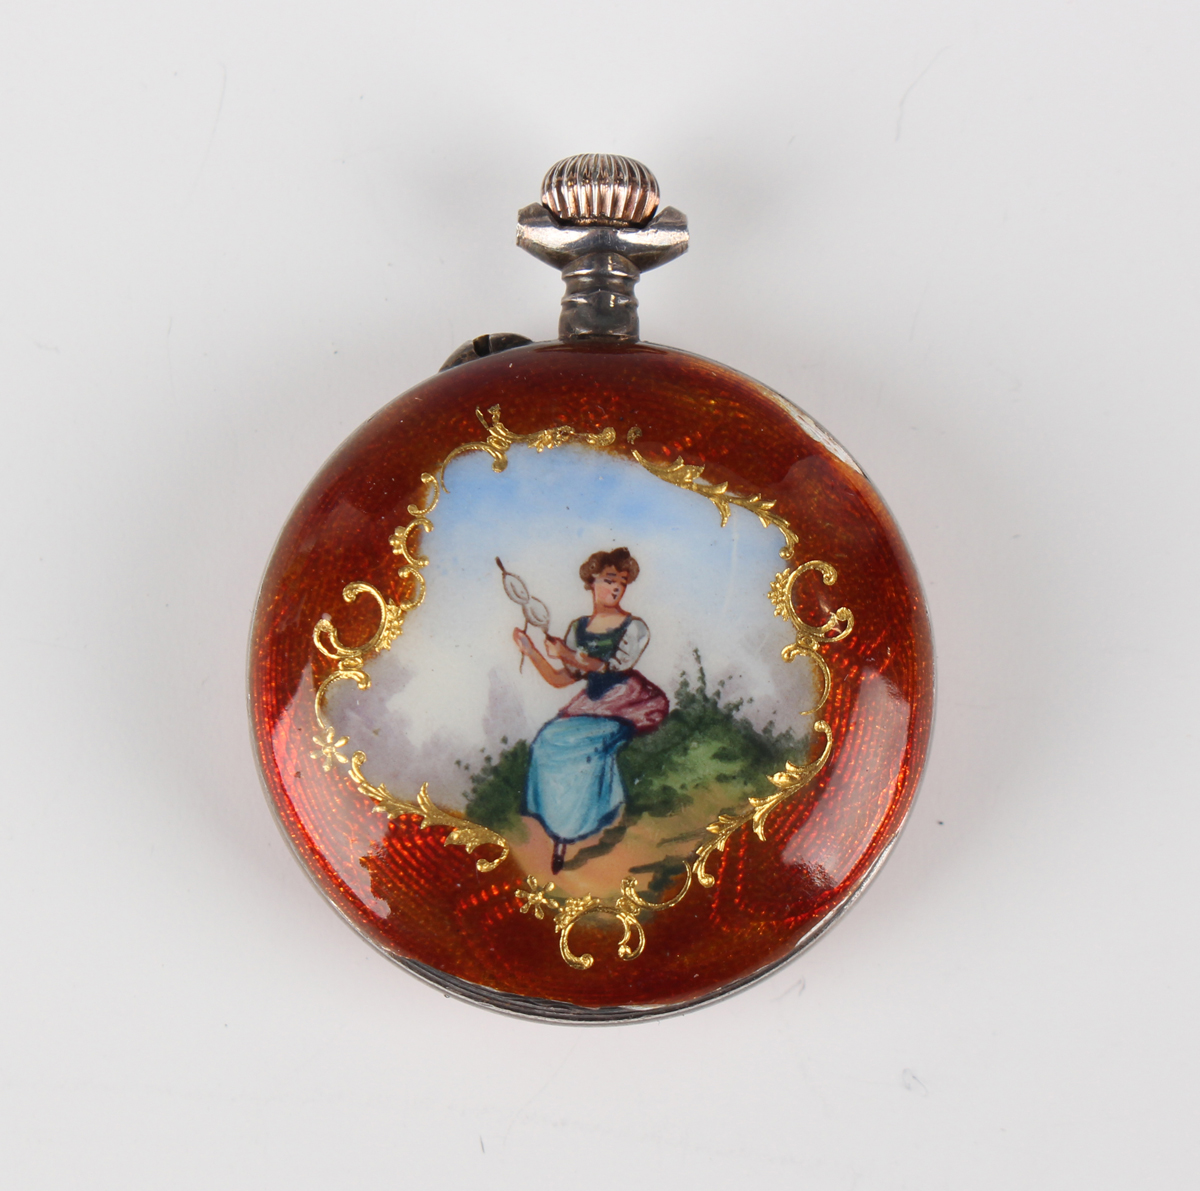 A Swiss silver and enamelled keyless wind open-faced lady's fob watch with unsigned gilt jewelled - Image 2 of 4